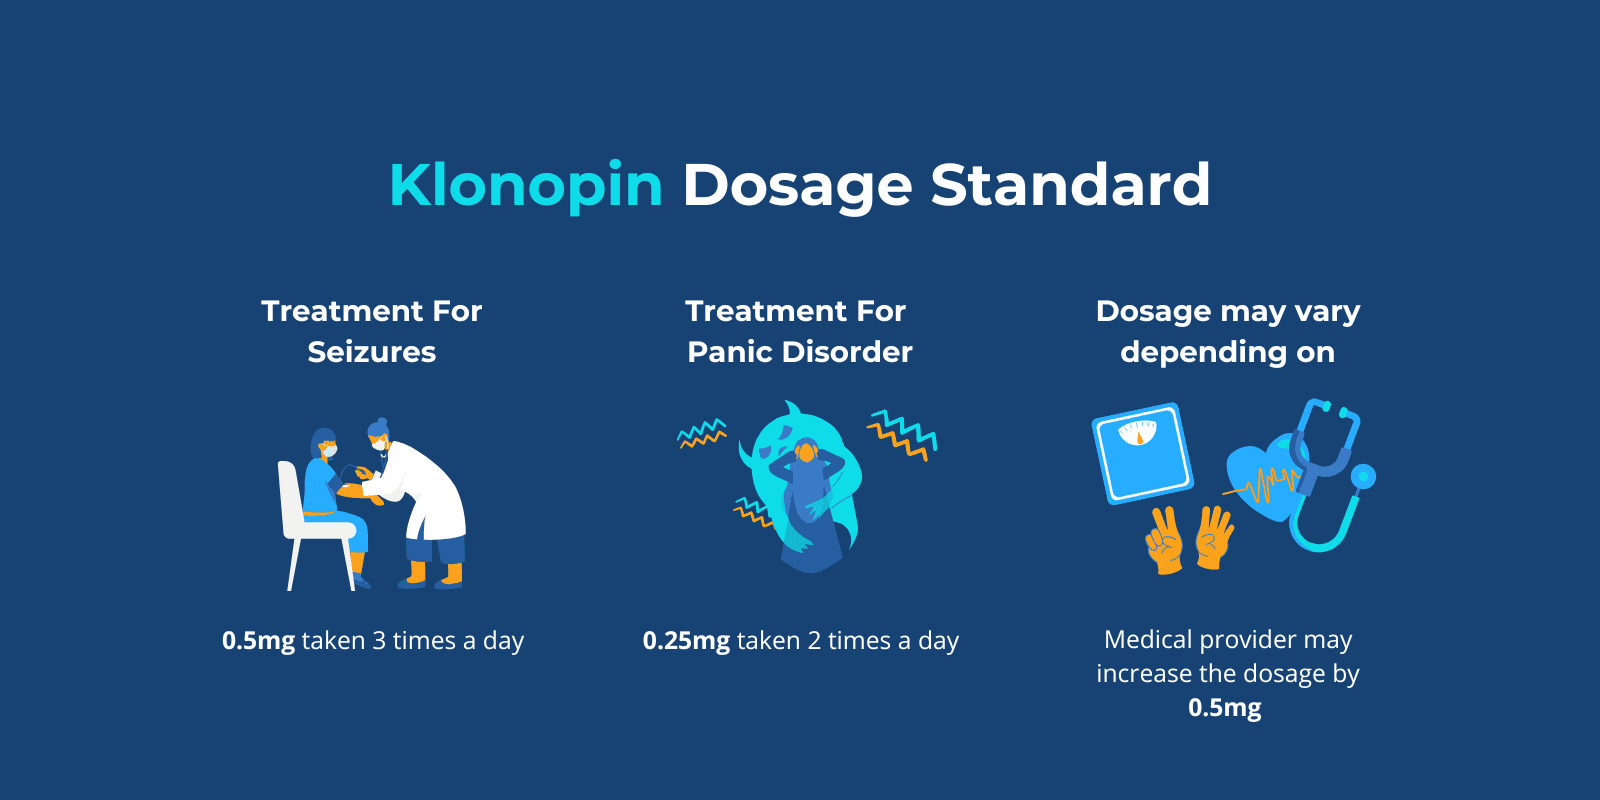 Klonopin dosage standard based on treatment for seizures with an illustration of a doctor looking at a patient, treatment for panic disorder with an illustration of a girl panicking and "dosage may vary depending on" text above weight scale, age counting hands, and stethoscope with heart